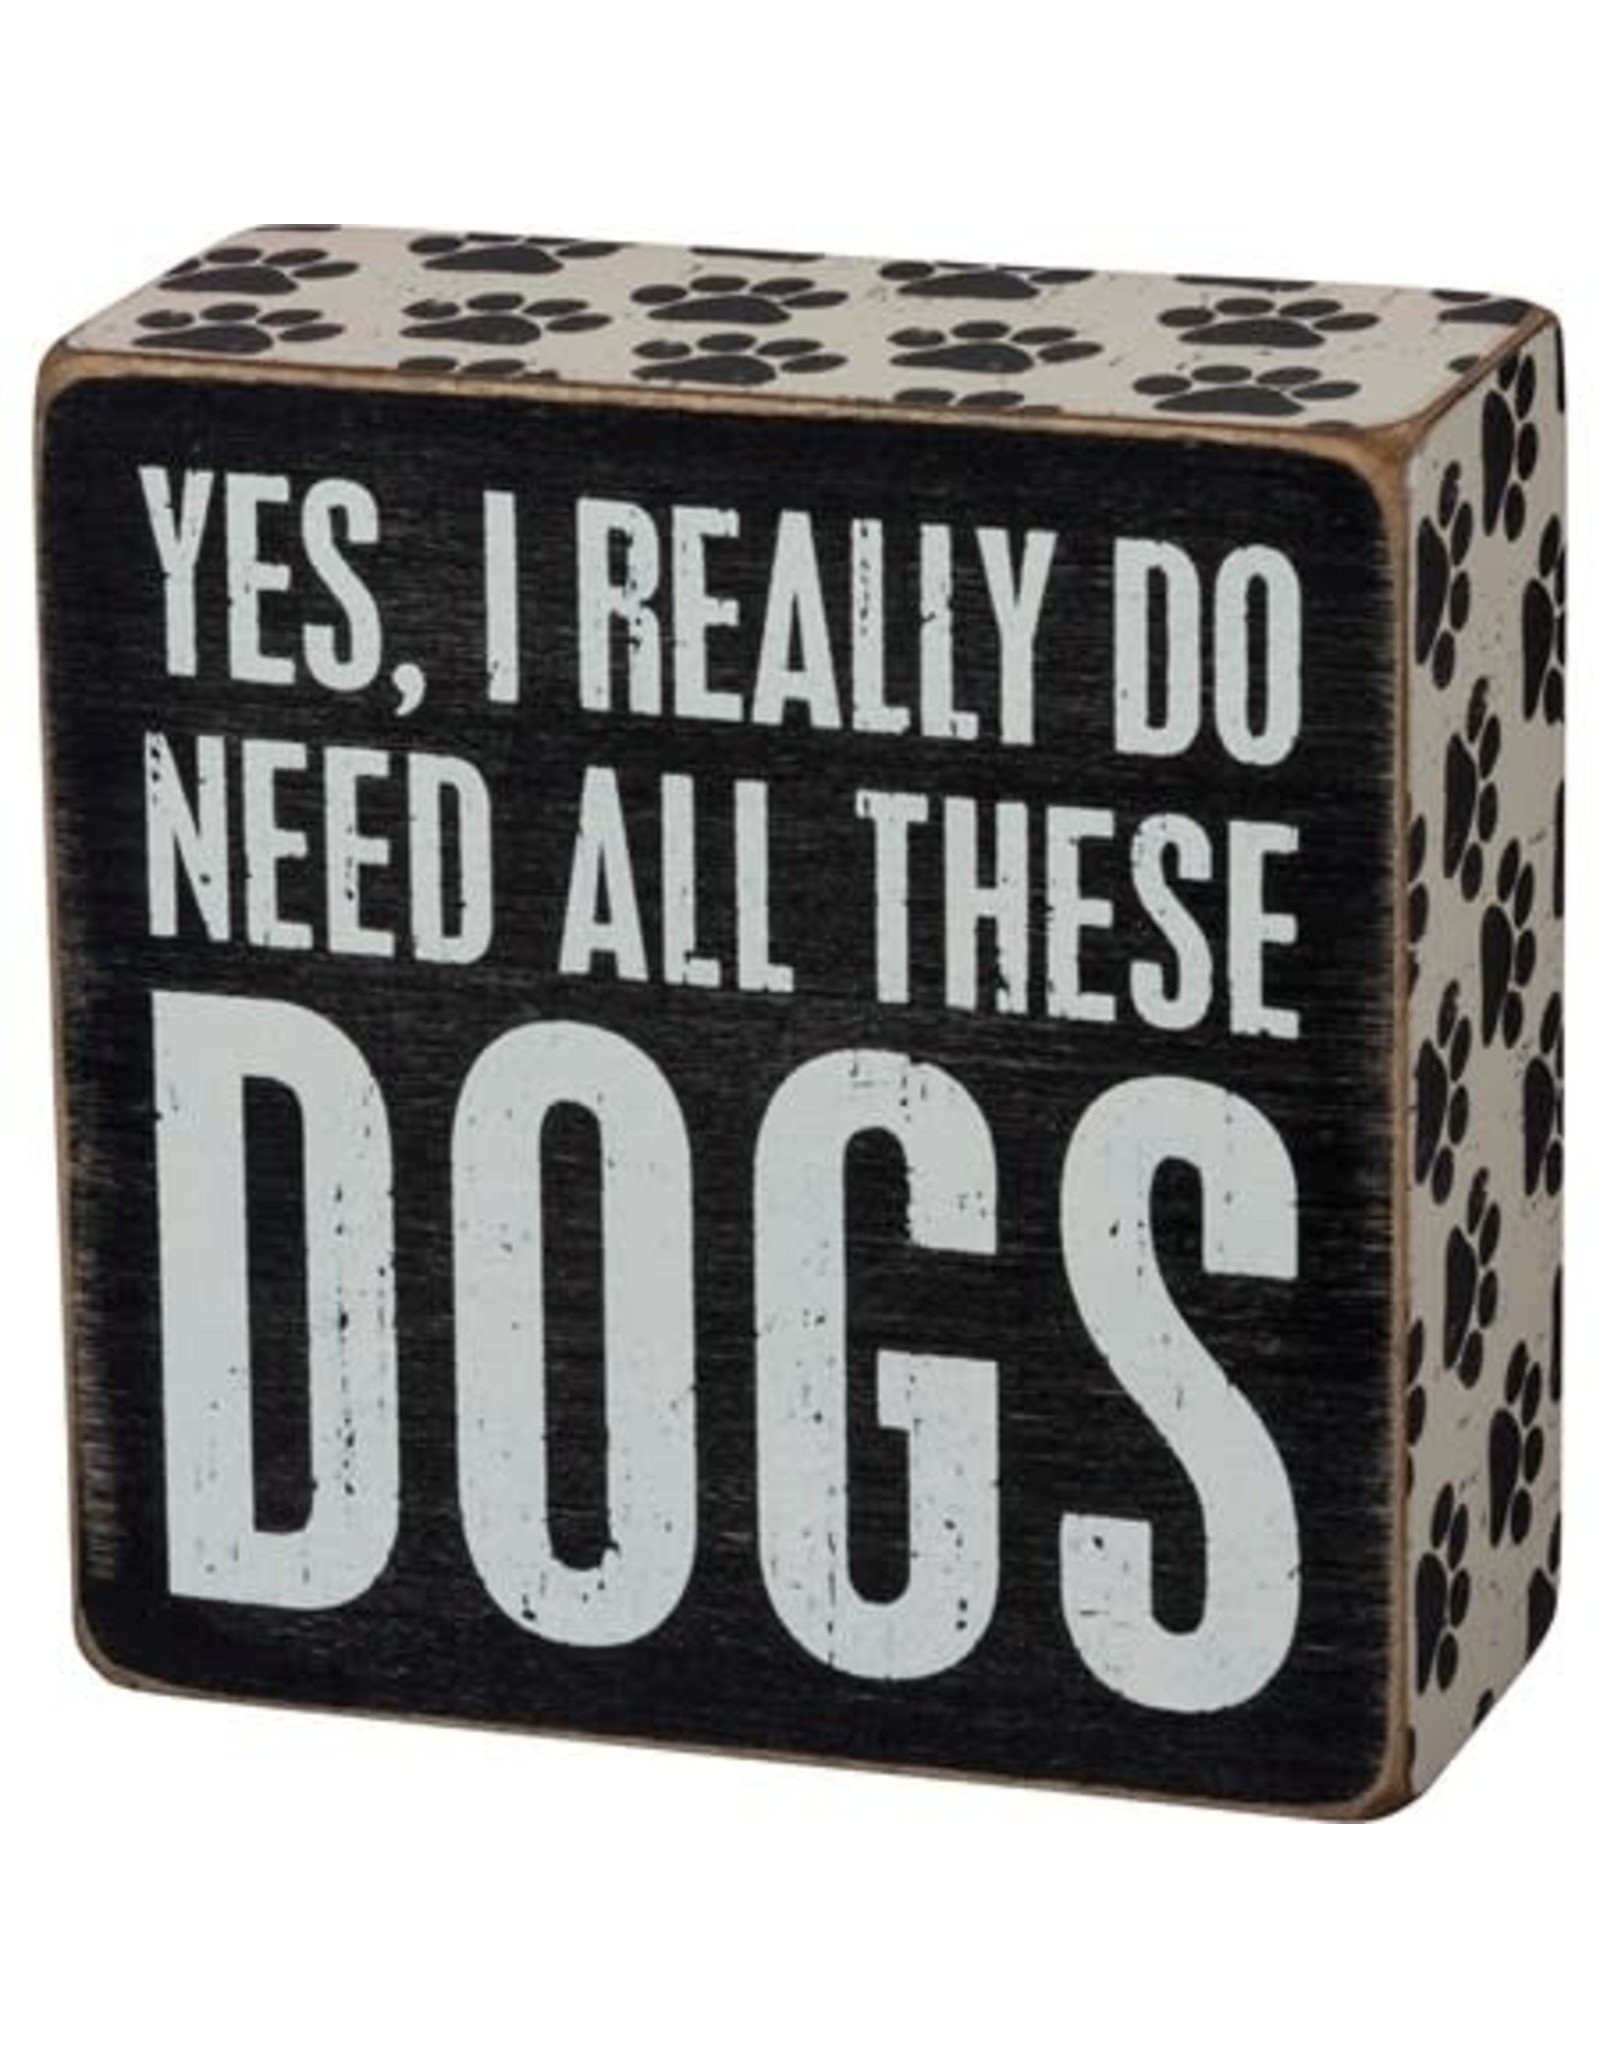 PRIMITIVES BY KATHY PET LOVER BLOCK SIGNS REALLY DO NEED ALL THESE DOGS